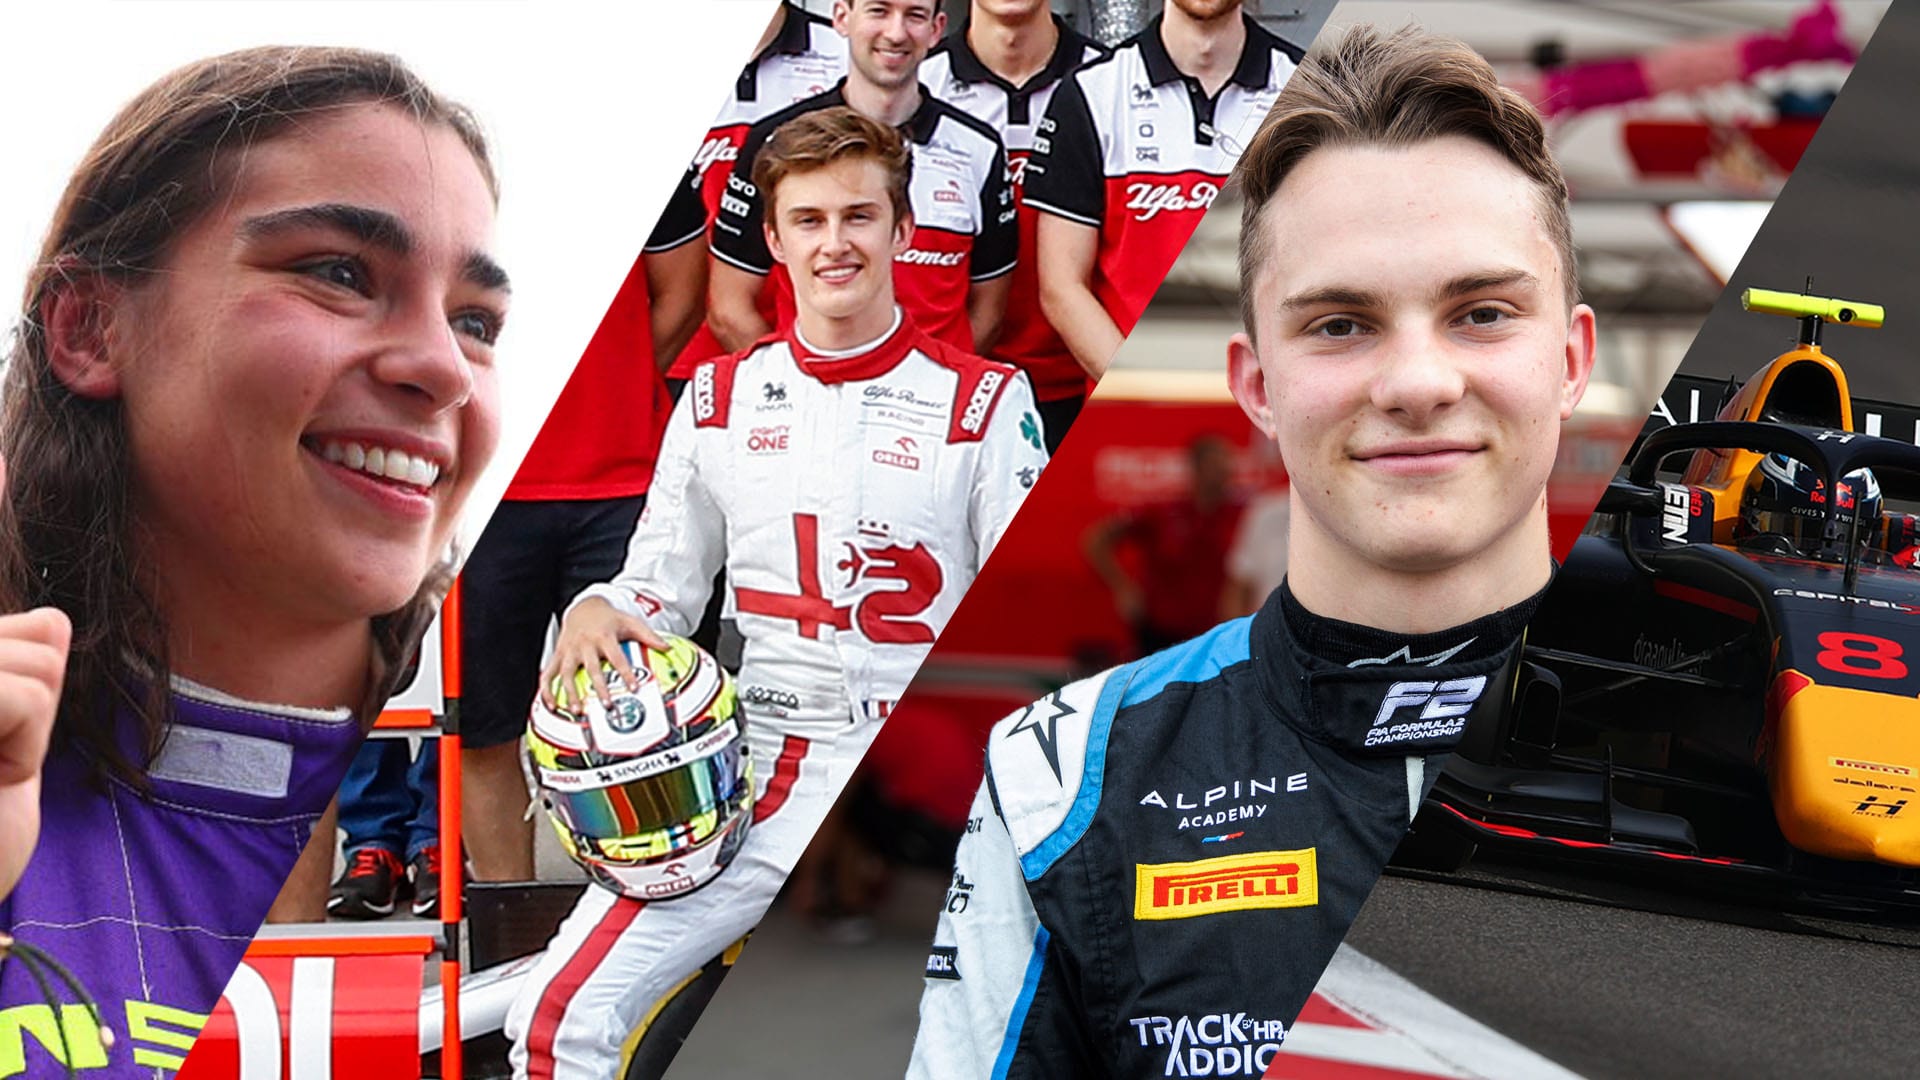 NEXT GEN 20 of the most exciting up-and-coming talents on the road to F1 Formula 1®